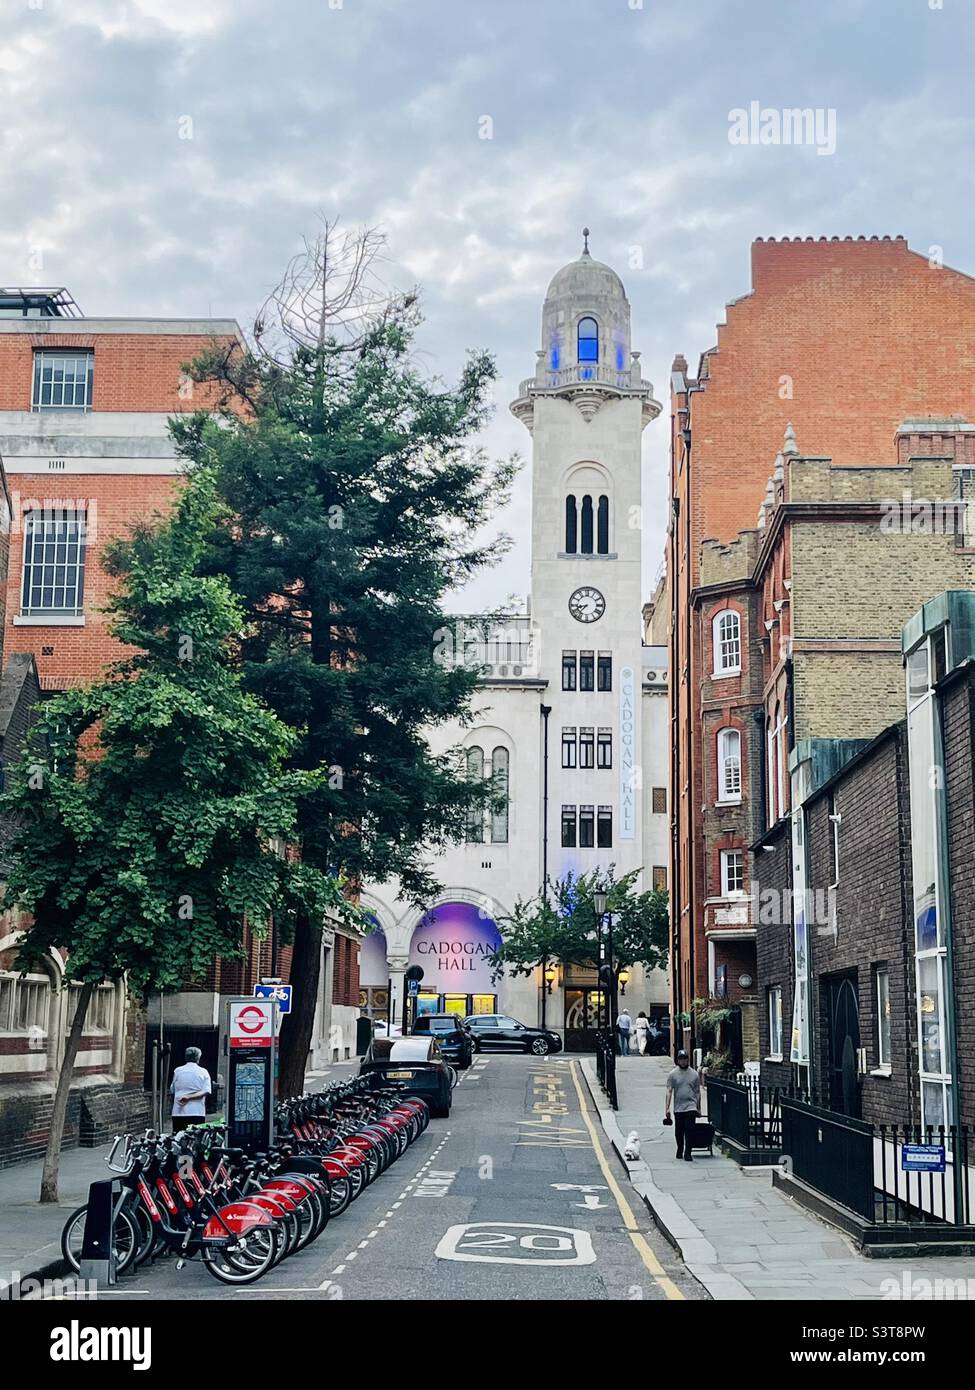 Cadogan Hall first opened in 1907 as a new Christian Science Church designed by Robert Fellowes Chisholm in Chelsea, London. Seen here on a June evening 2022 Stock Photo